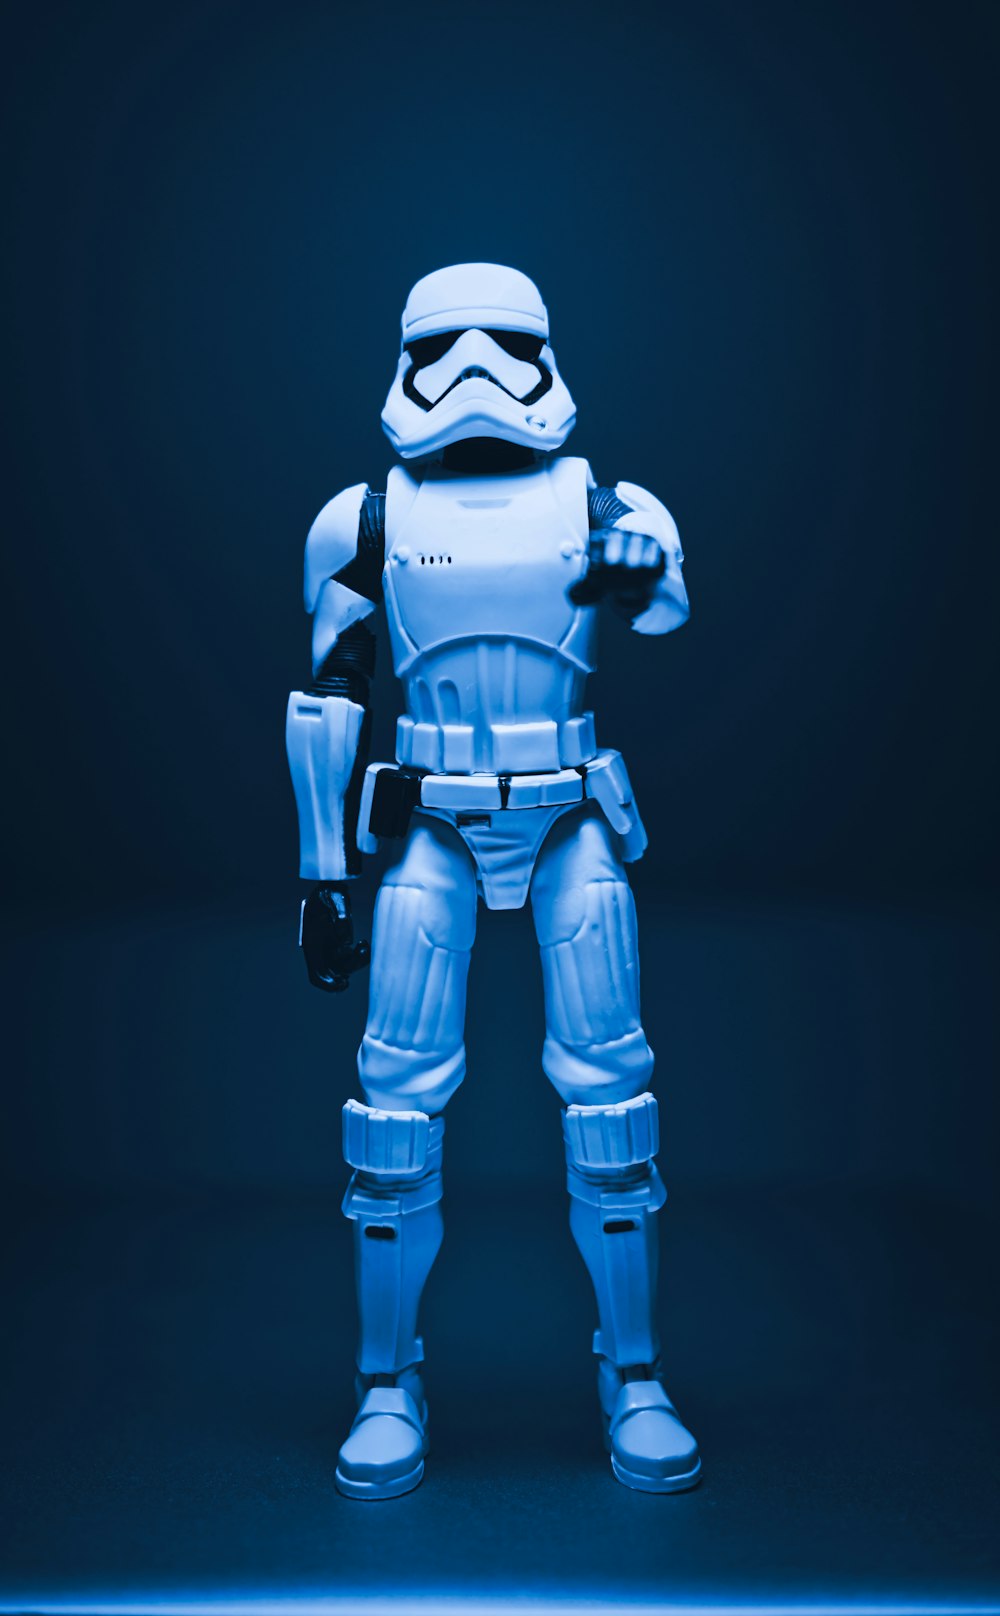 a star wars action figure standing in a dark room